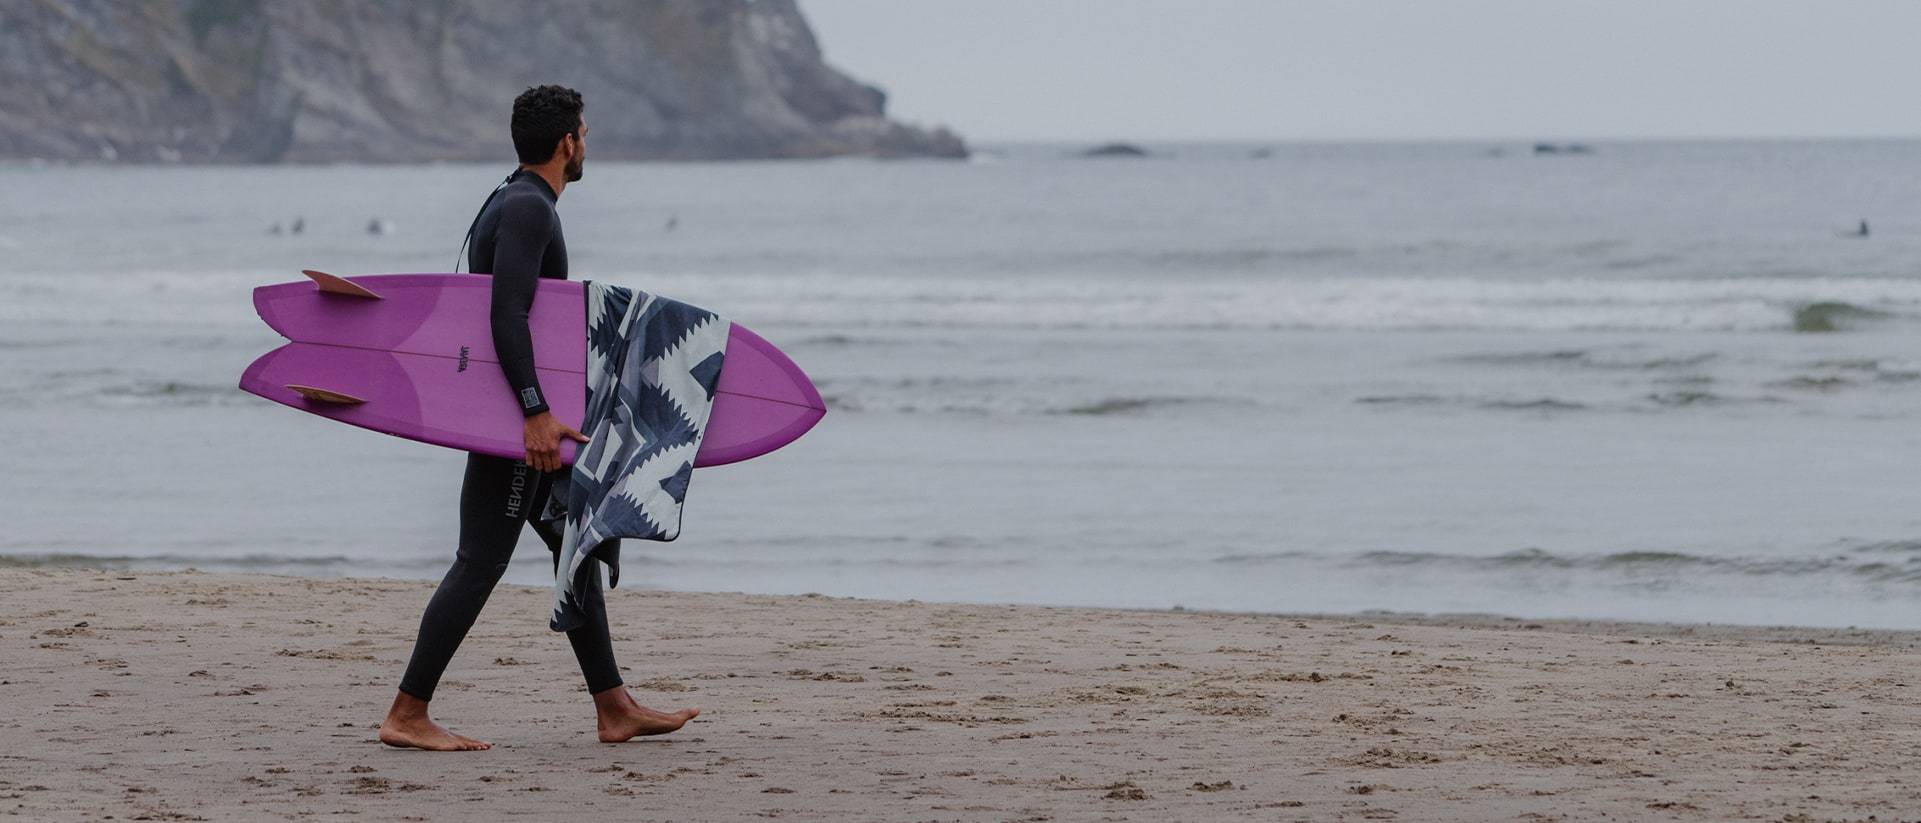 Man surfing with shammy towel draped over his board